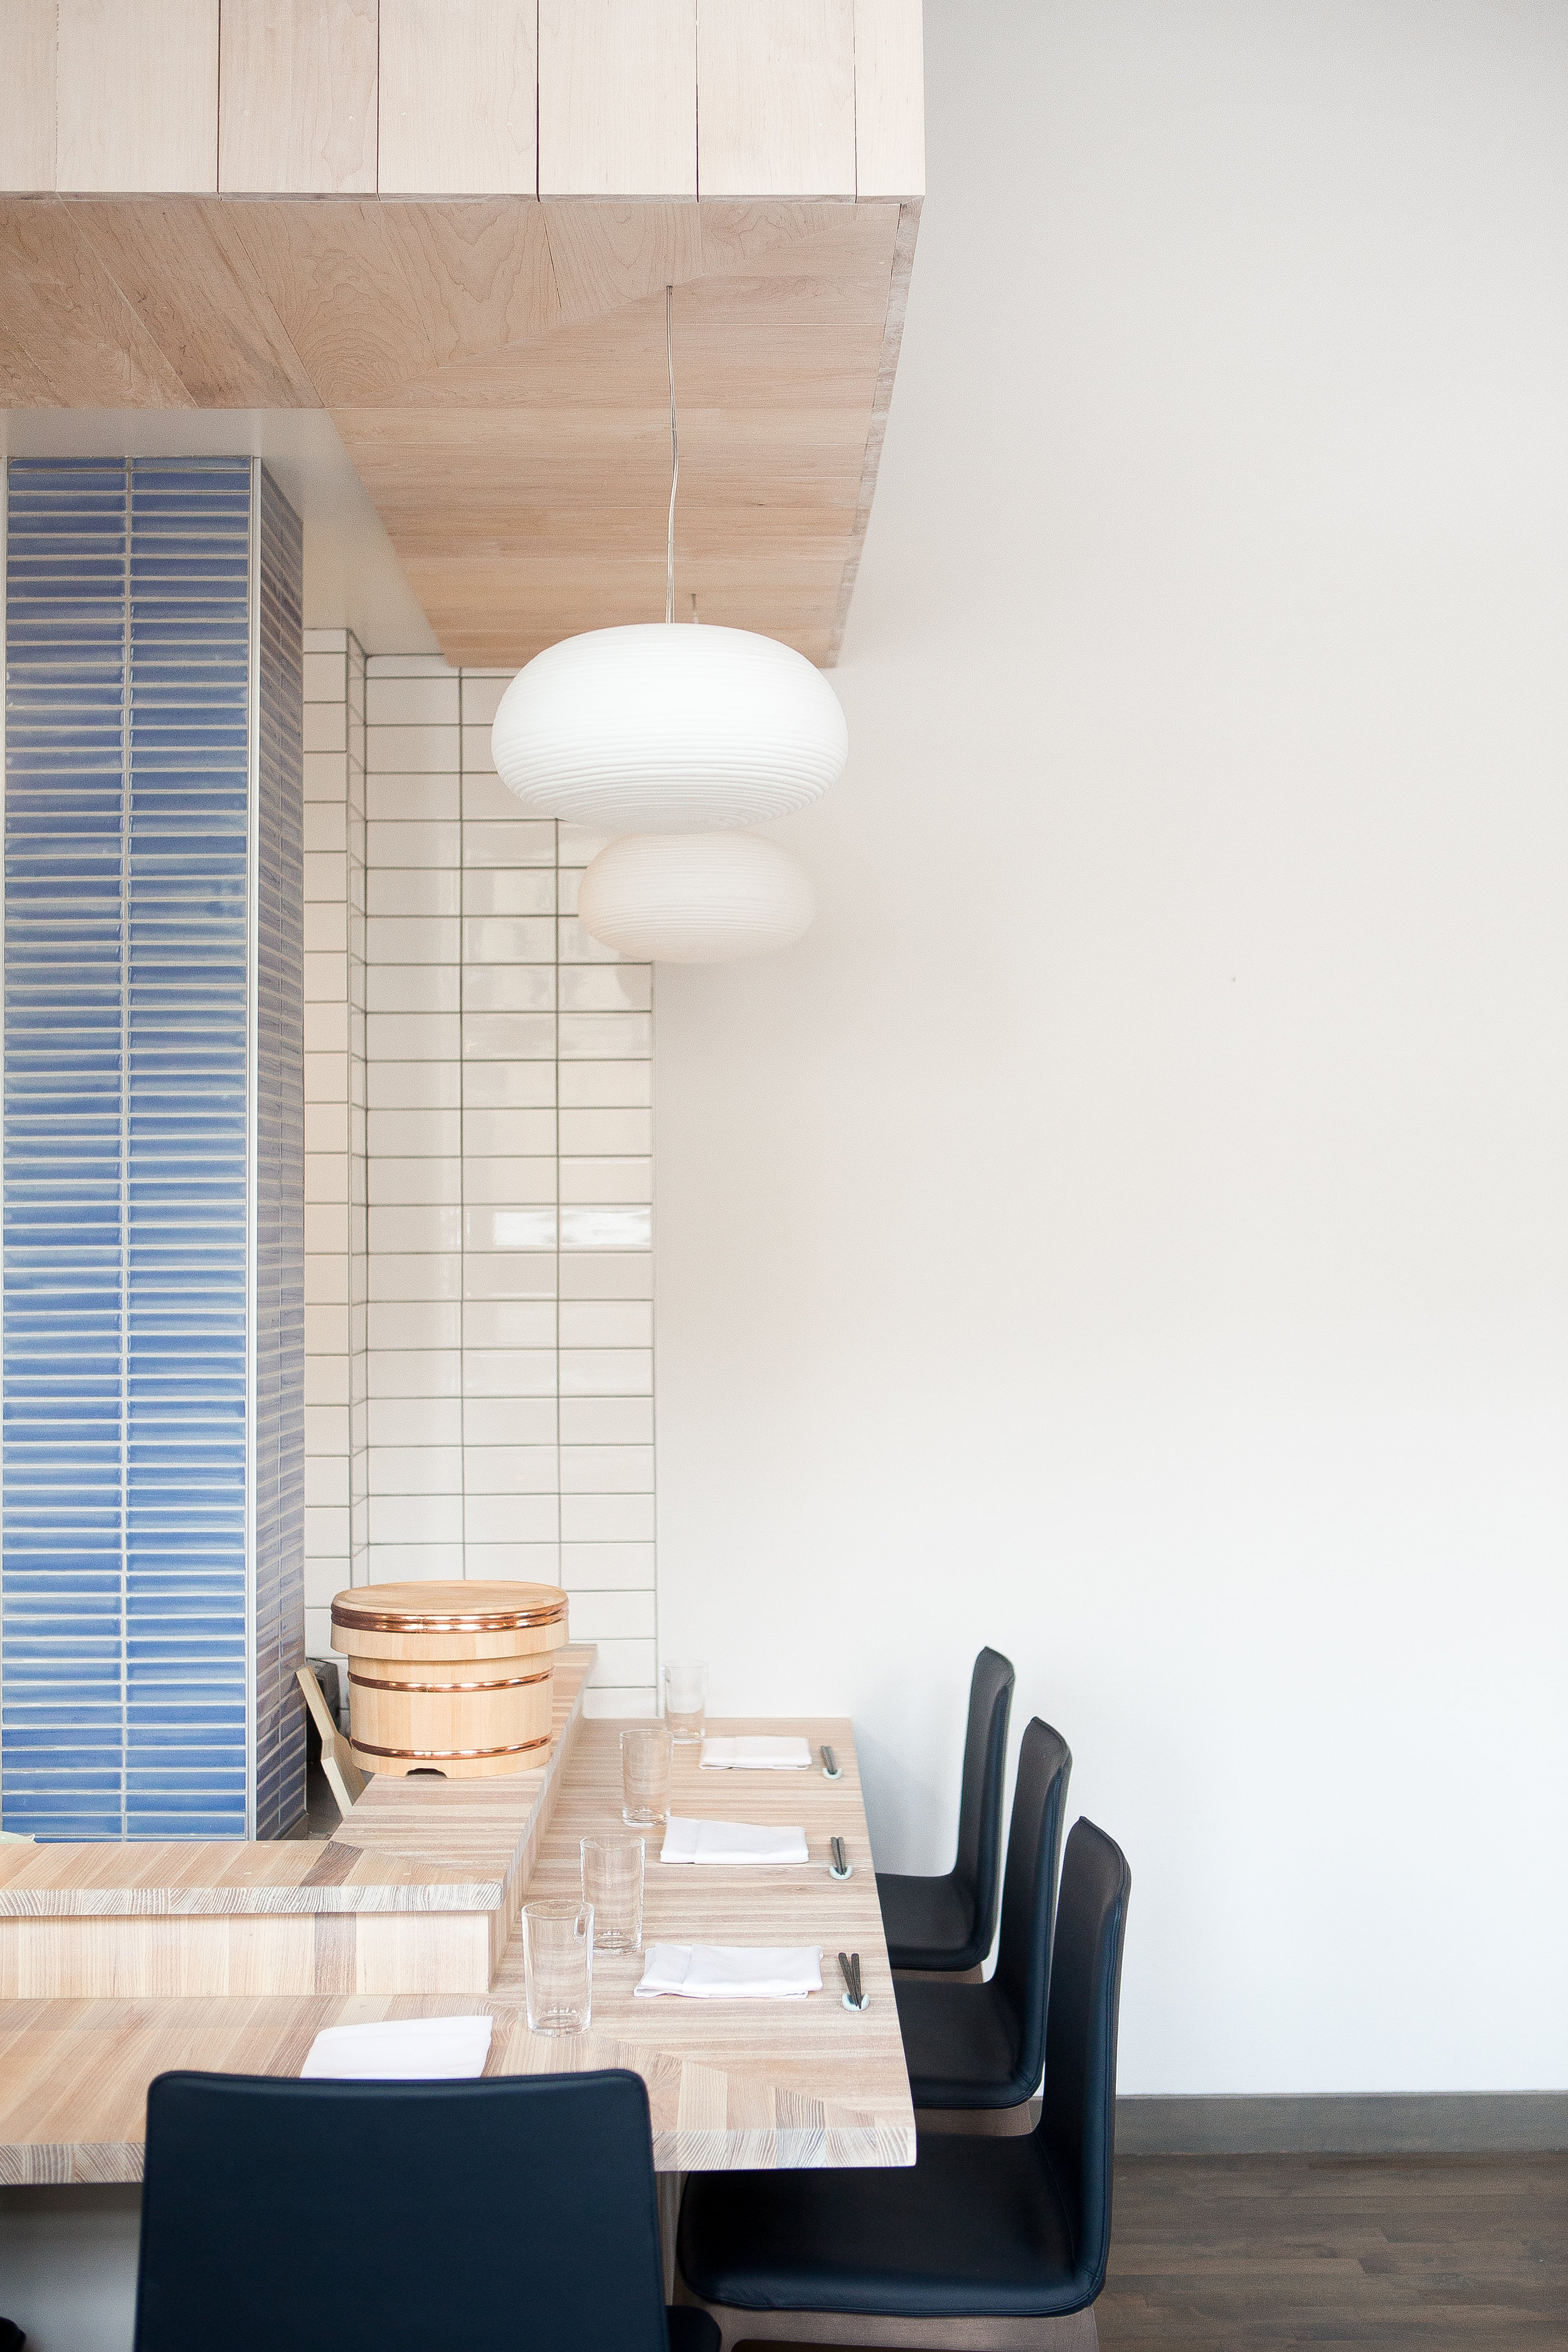 custom wood bar in restaurant with horizontally stacked gridded tile